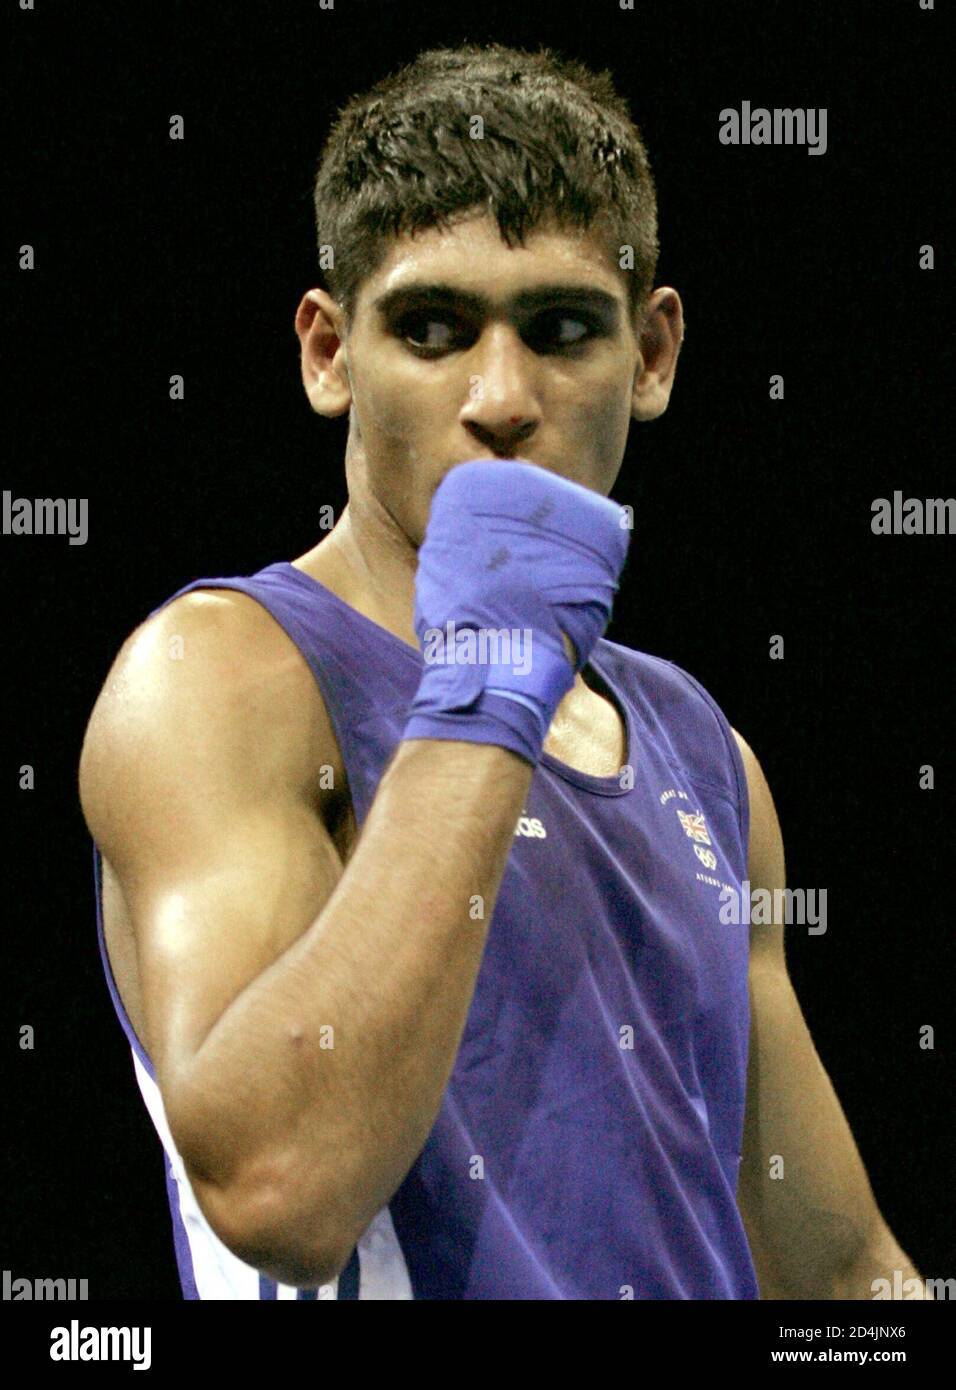 Britain's Amir Khan celebrates victory [over Kazakhstan's Serik Yeleuov] during the men's lightweight (60 kg) semi-final boxing match at the Athens 2004 Olympic Summer Games, August 27, 2004. Khan won the match. Stock Photo